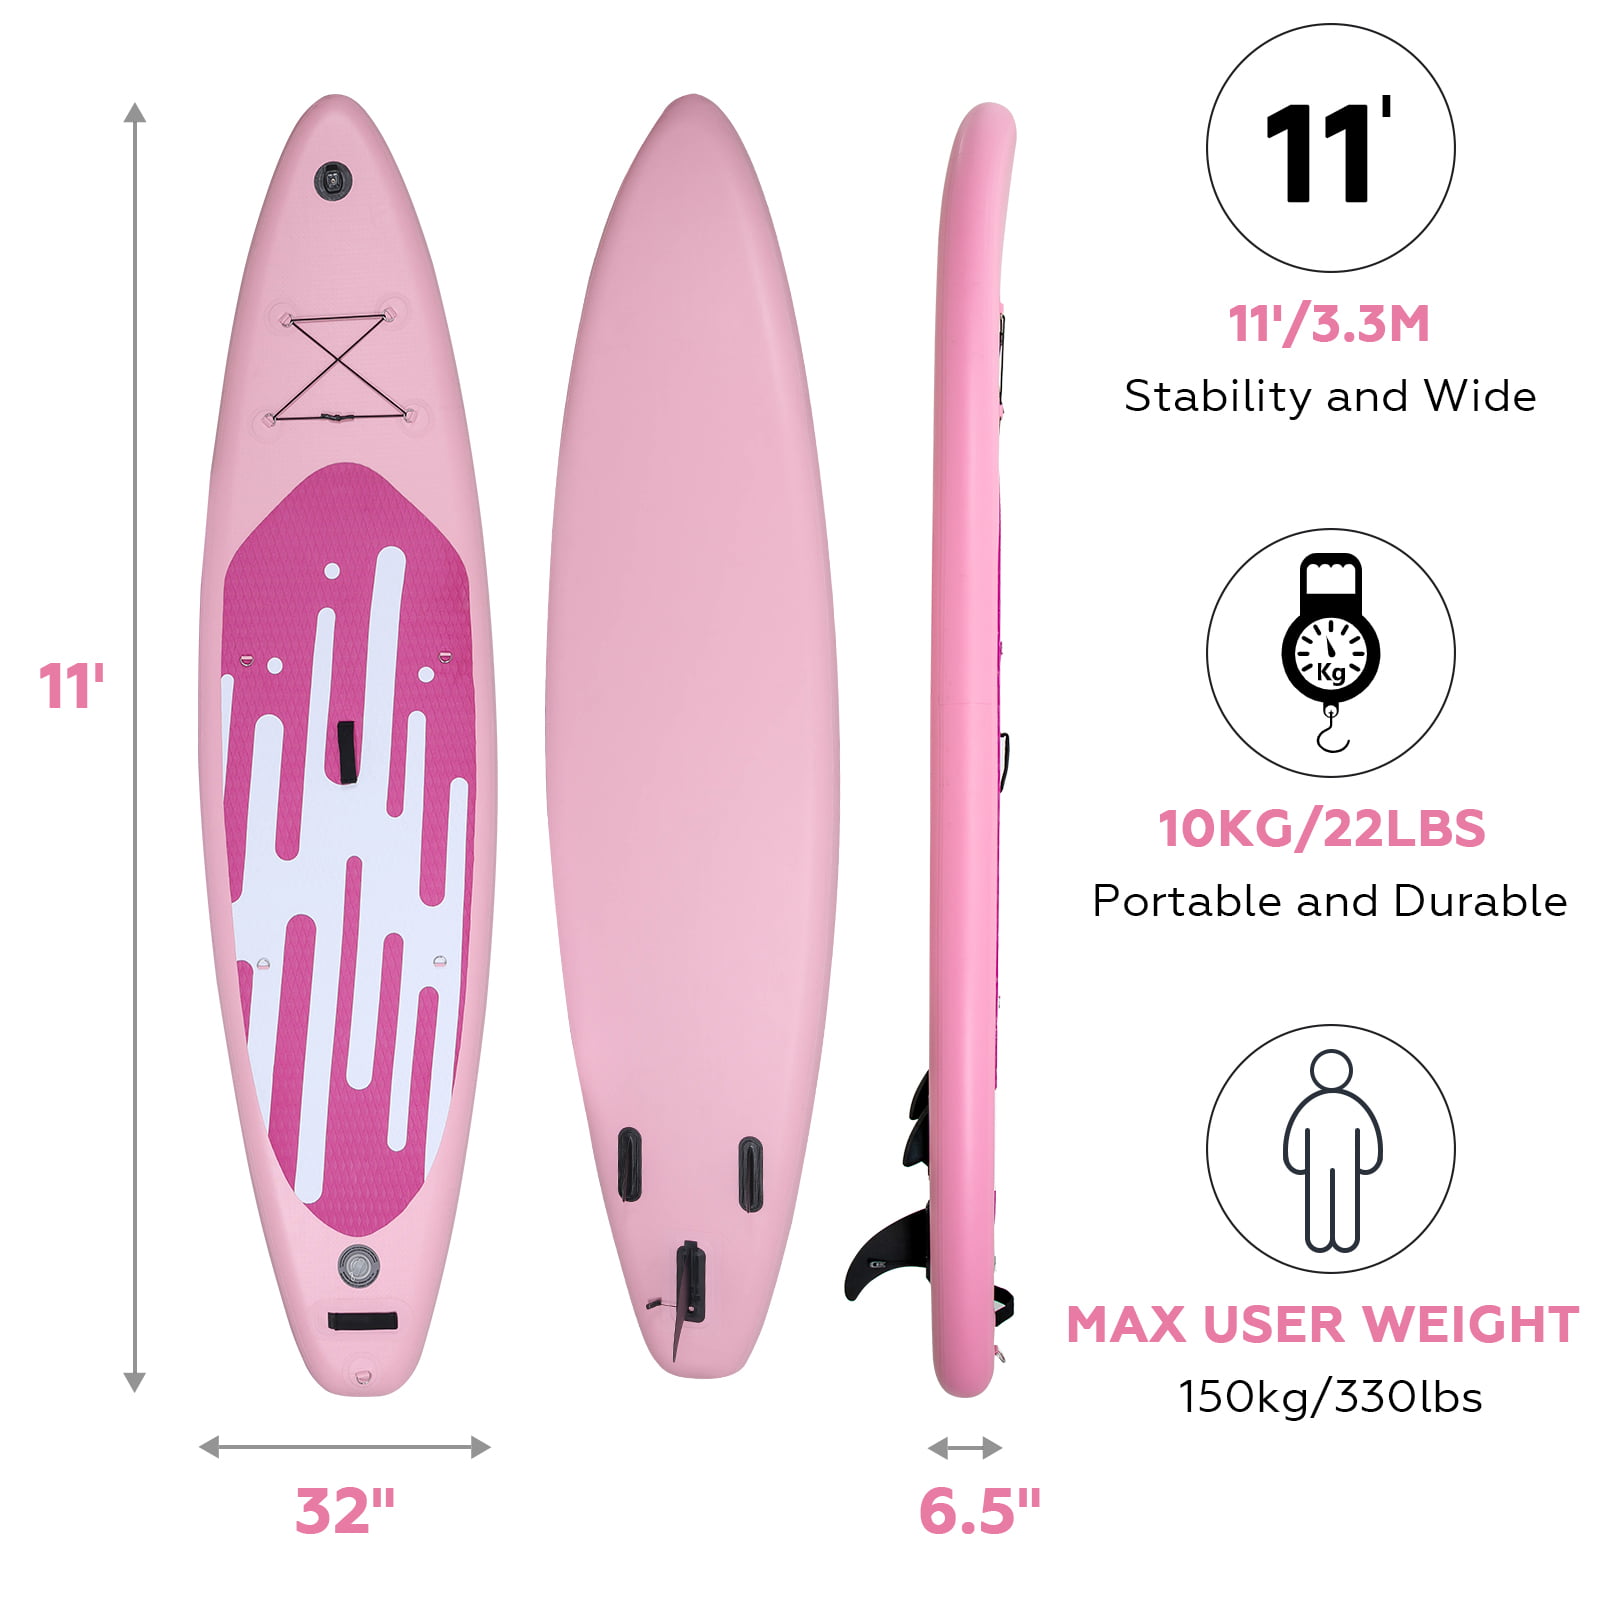 ELECWISH 11Ft Inflatable Stand Up Paddle Board with Kayak Seat, Non-Slip Deck SUP Paddle Board Accessories Backpack Leash Pump, Pink - 2